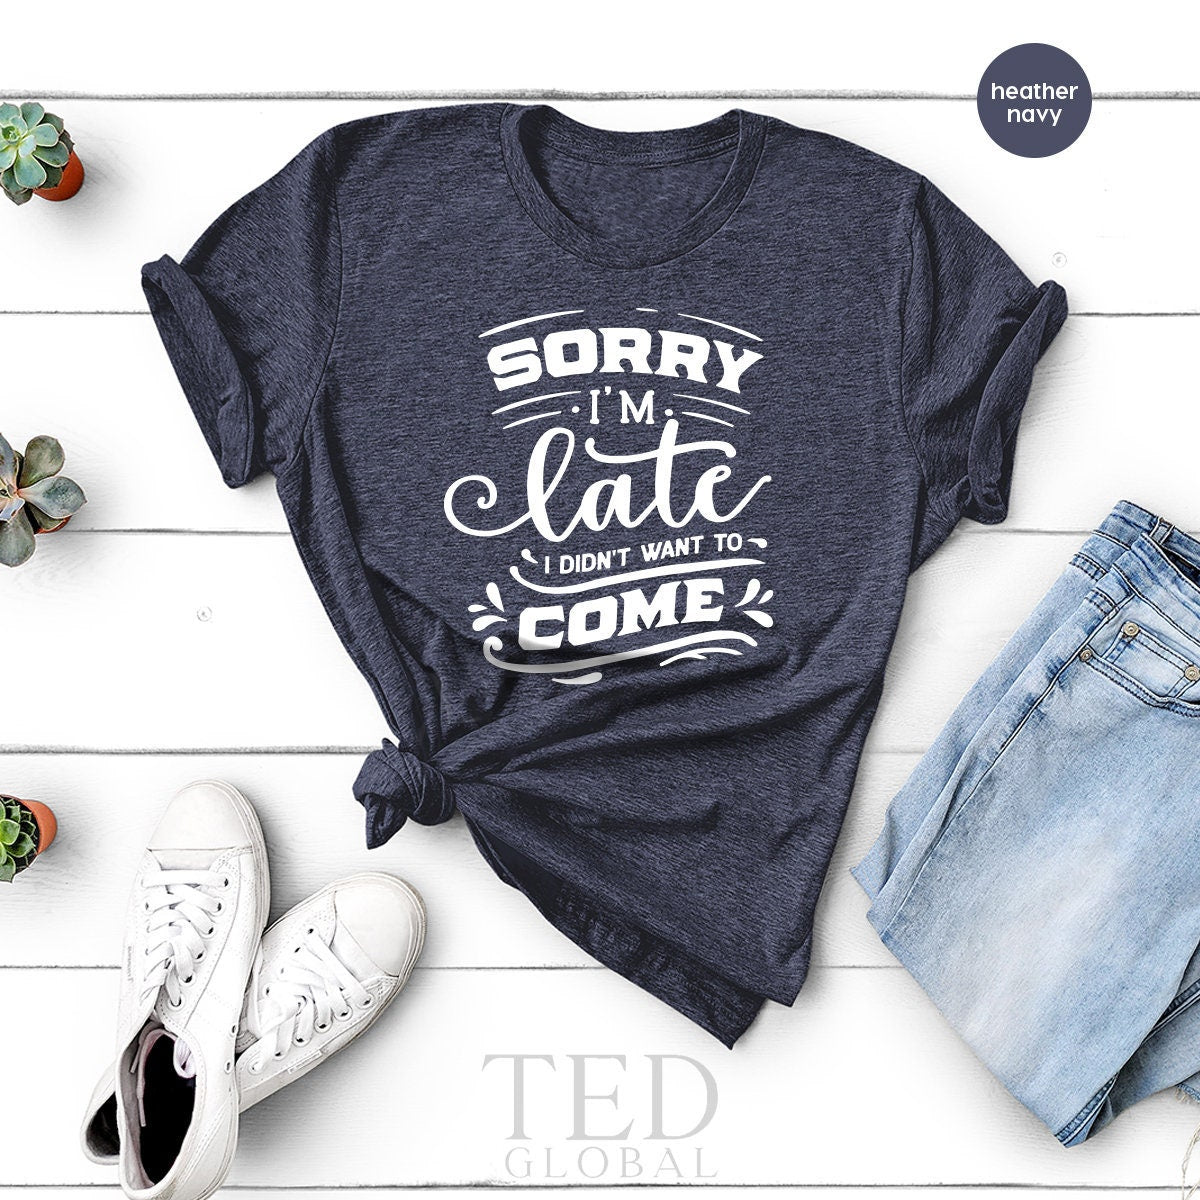 Sorry I'm Late I Didn't Want to Come TShirt, Sorry Not Sorry, Funny Shirt, Cute Sassy Gift, Introvert Shirt, Sarcastic Shirt, Birthday Shirt - Fastdeliverytees.com